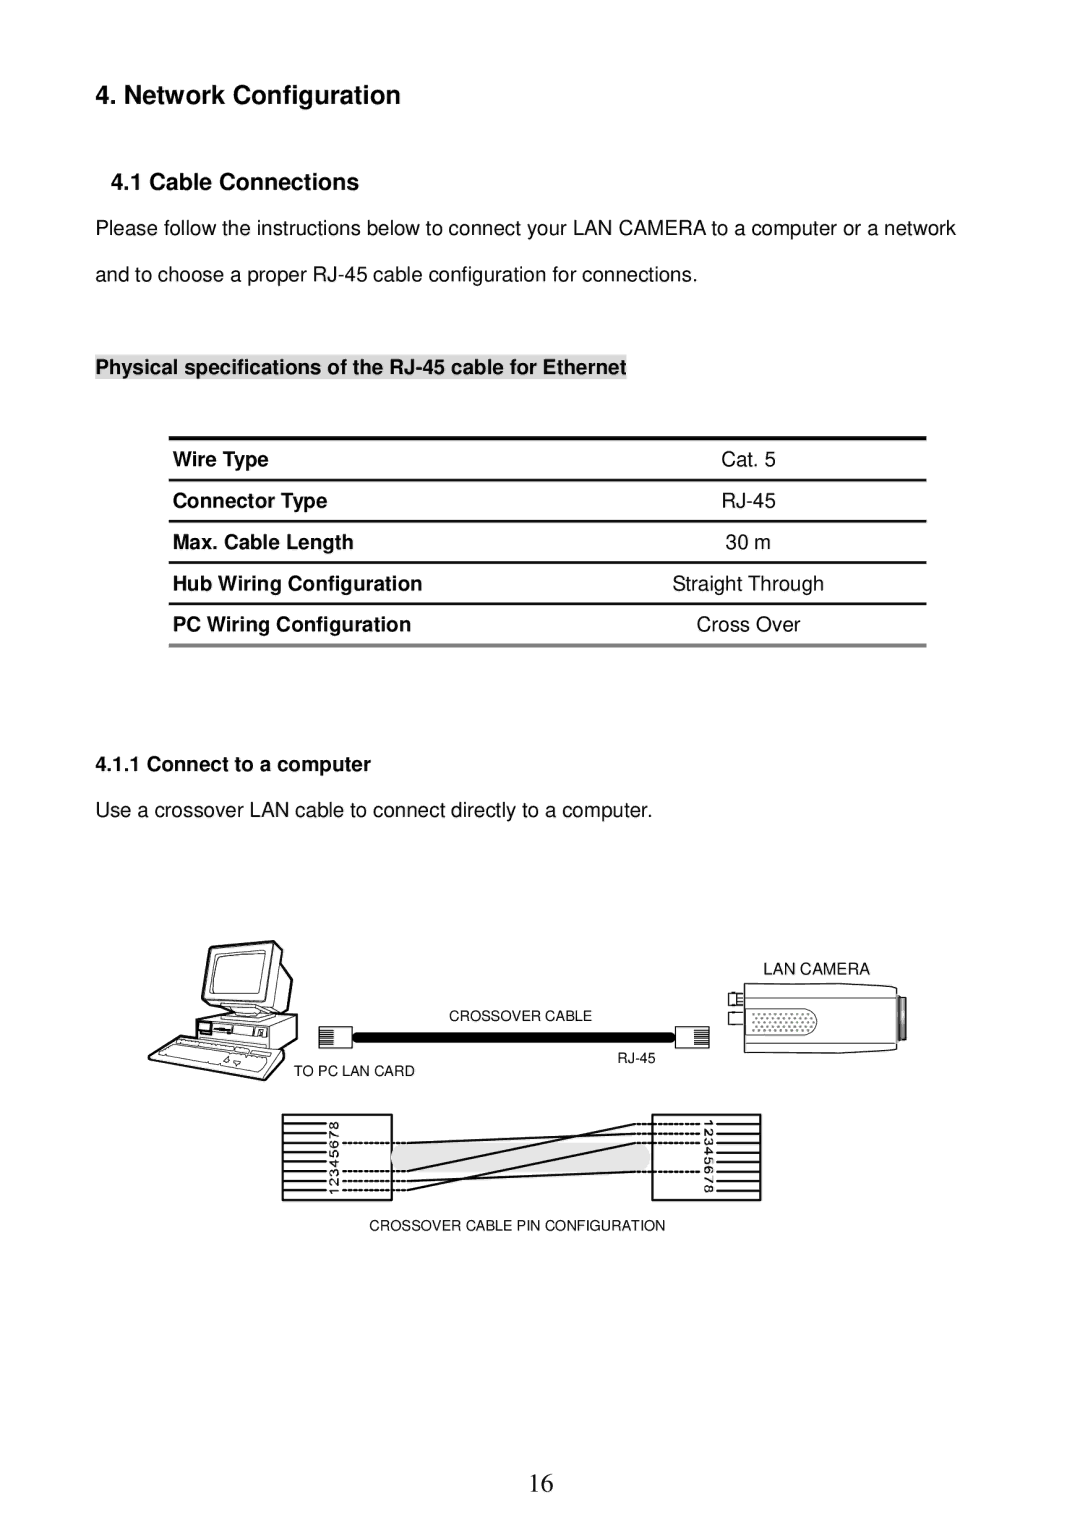 Sony MPEG4 LAN Camera operation manual Cable Connections, PC Wiring Configuration, Connect to a computer 